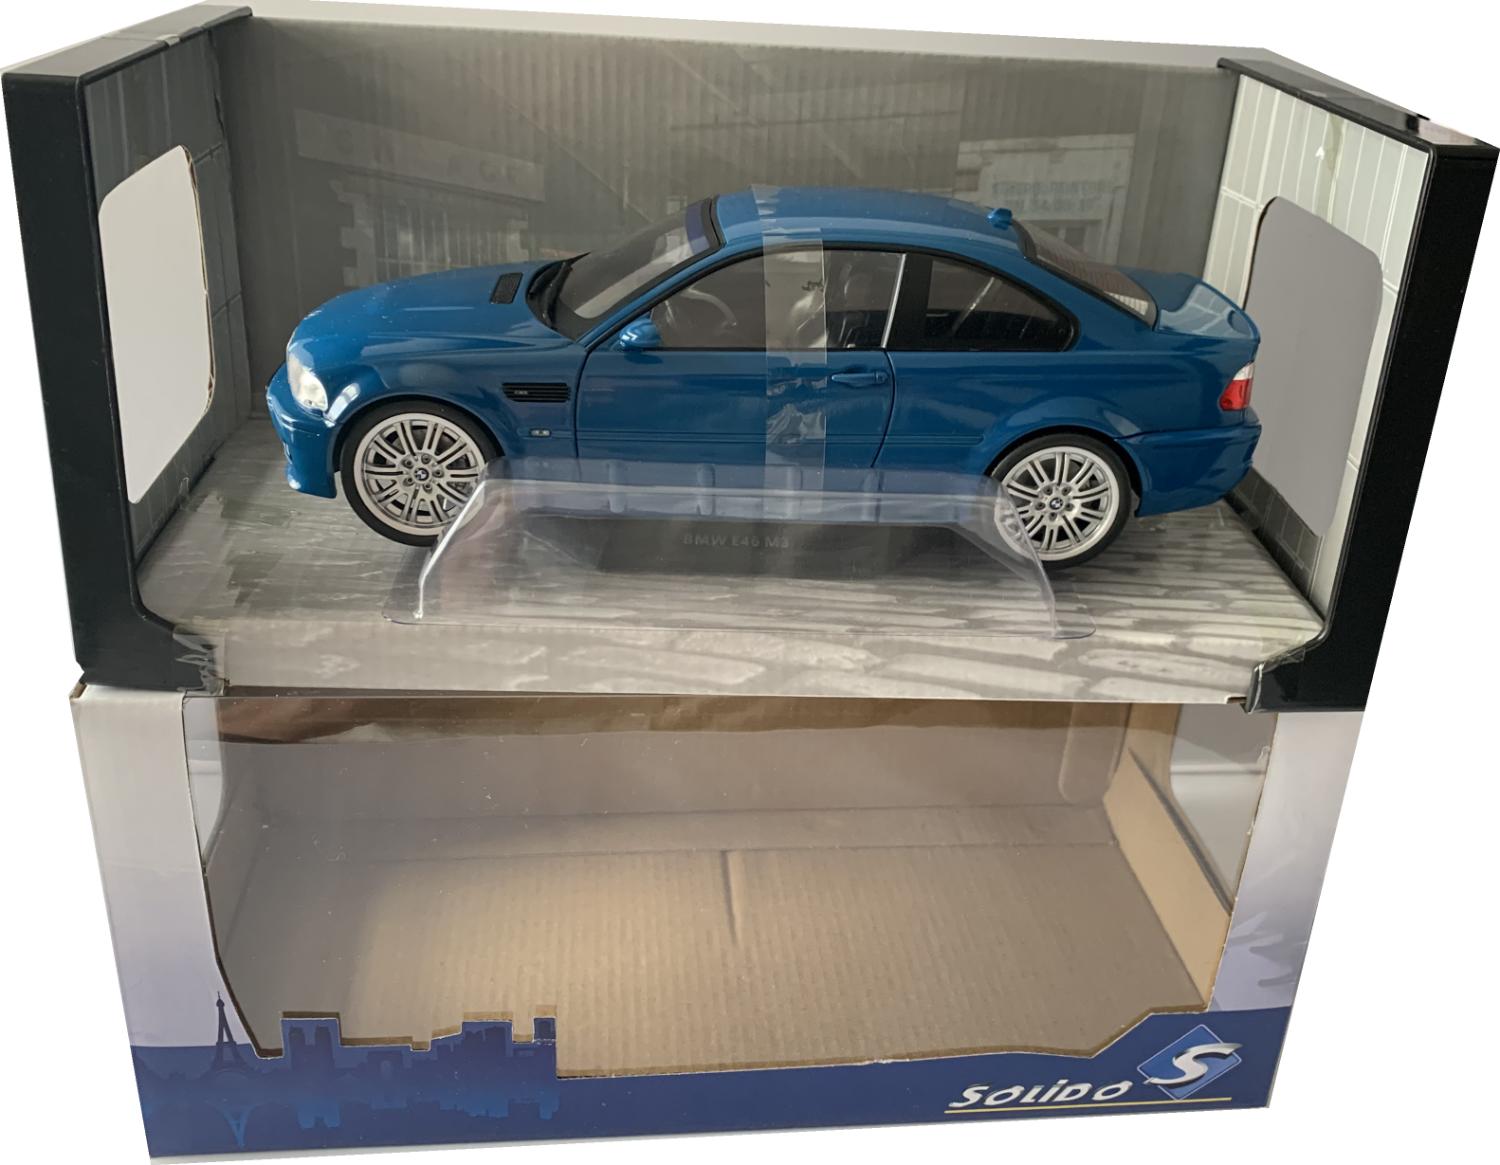 An excellent scale model of the BMW E46 Coupe M3 with high level of detail throughout, all authentically recreated.  Model is presented in a window display box.  The car is approx. 24 cm long and the presentation box is 31 cm long